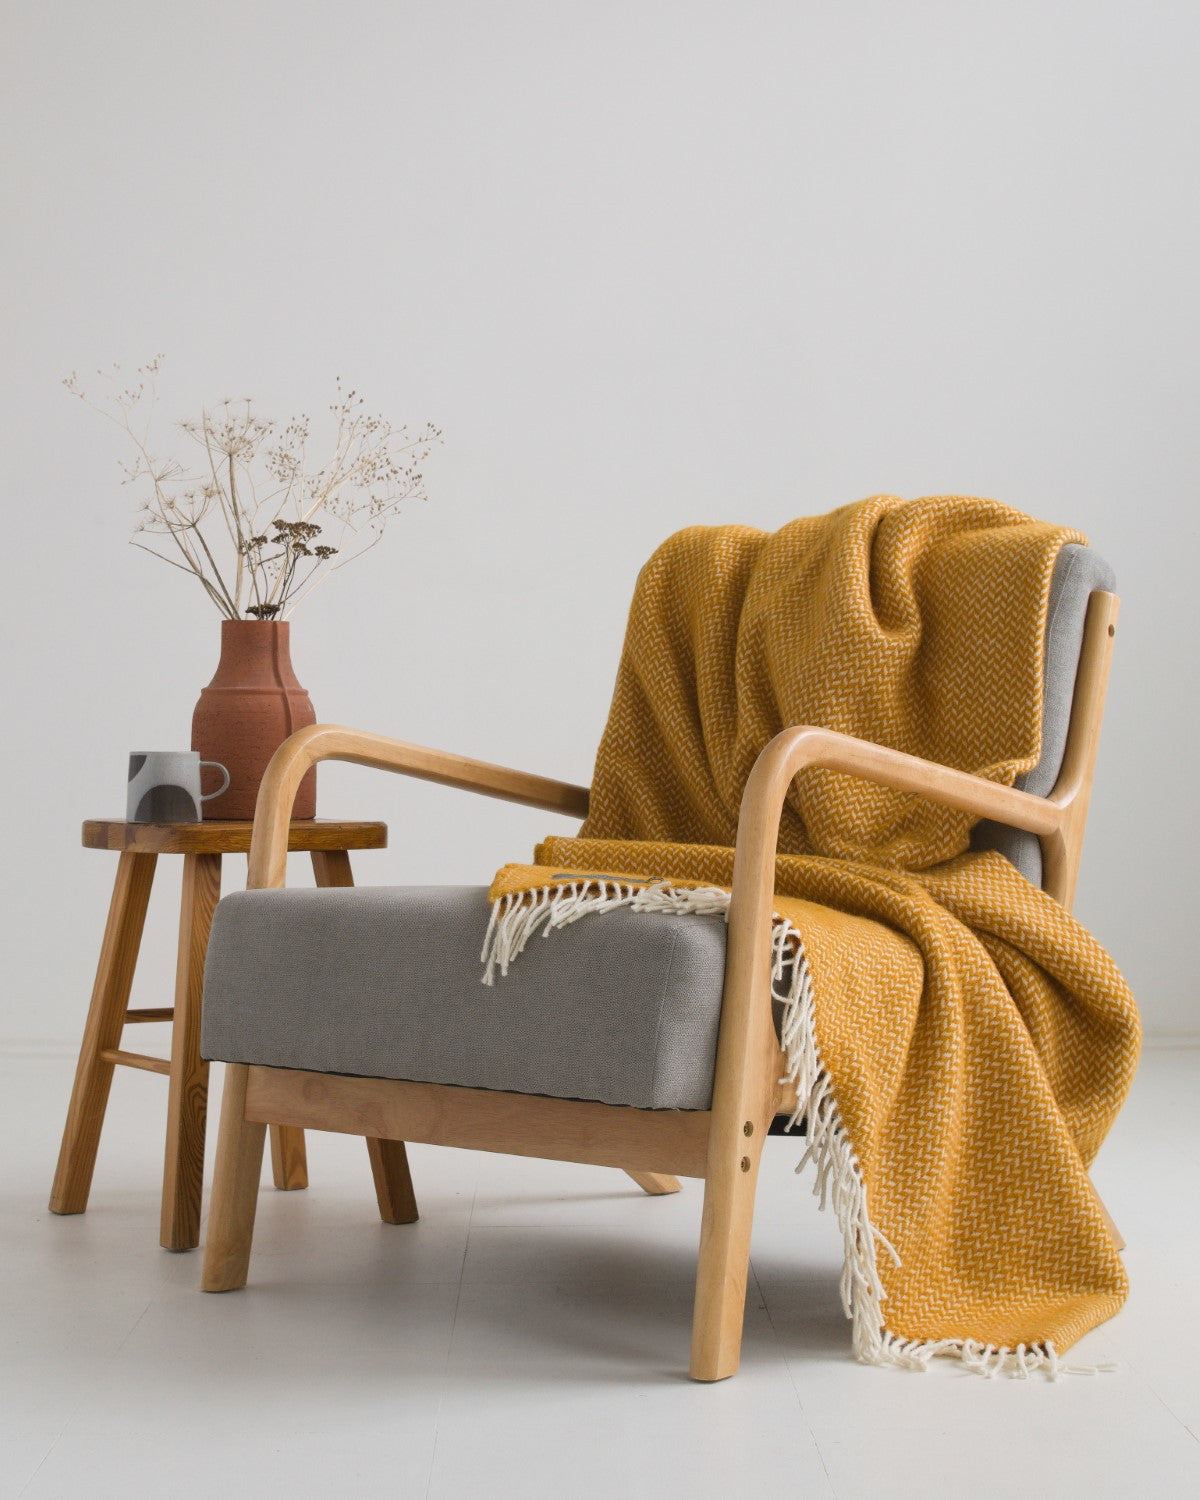 Extra large yellow herringbone wool blanket draped over a lounge chair